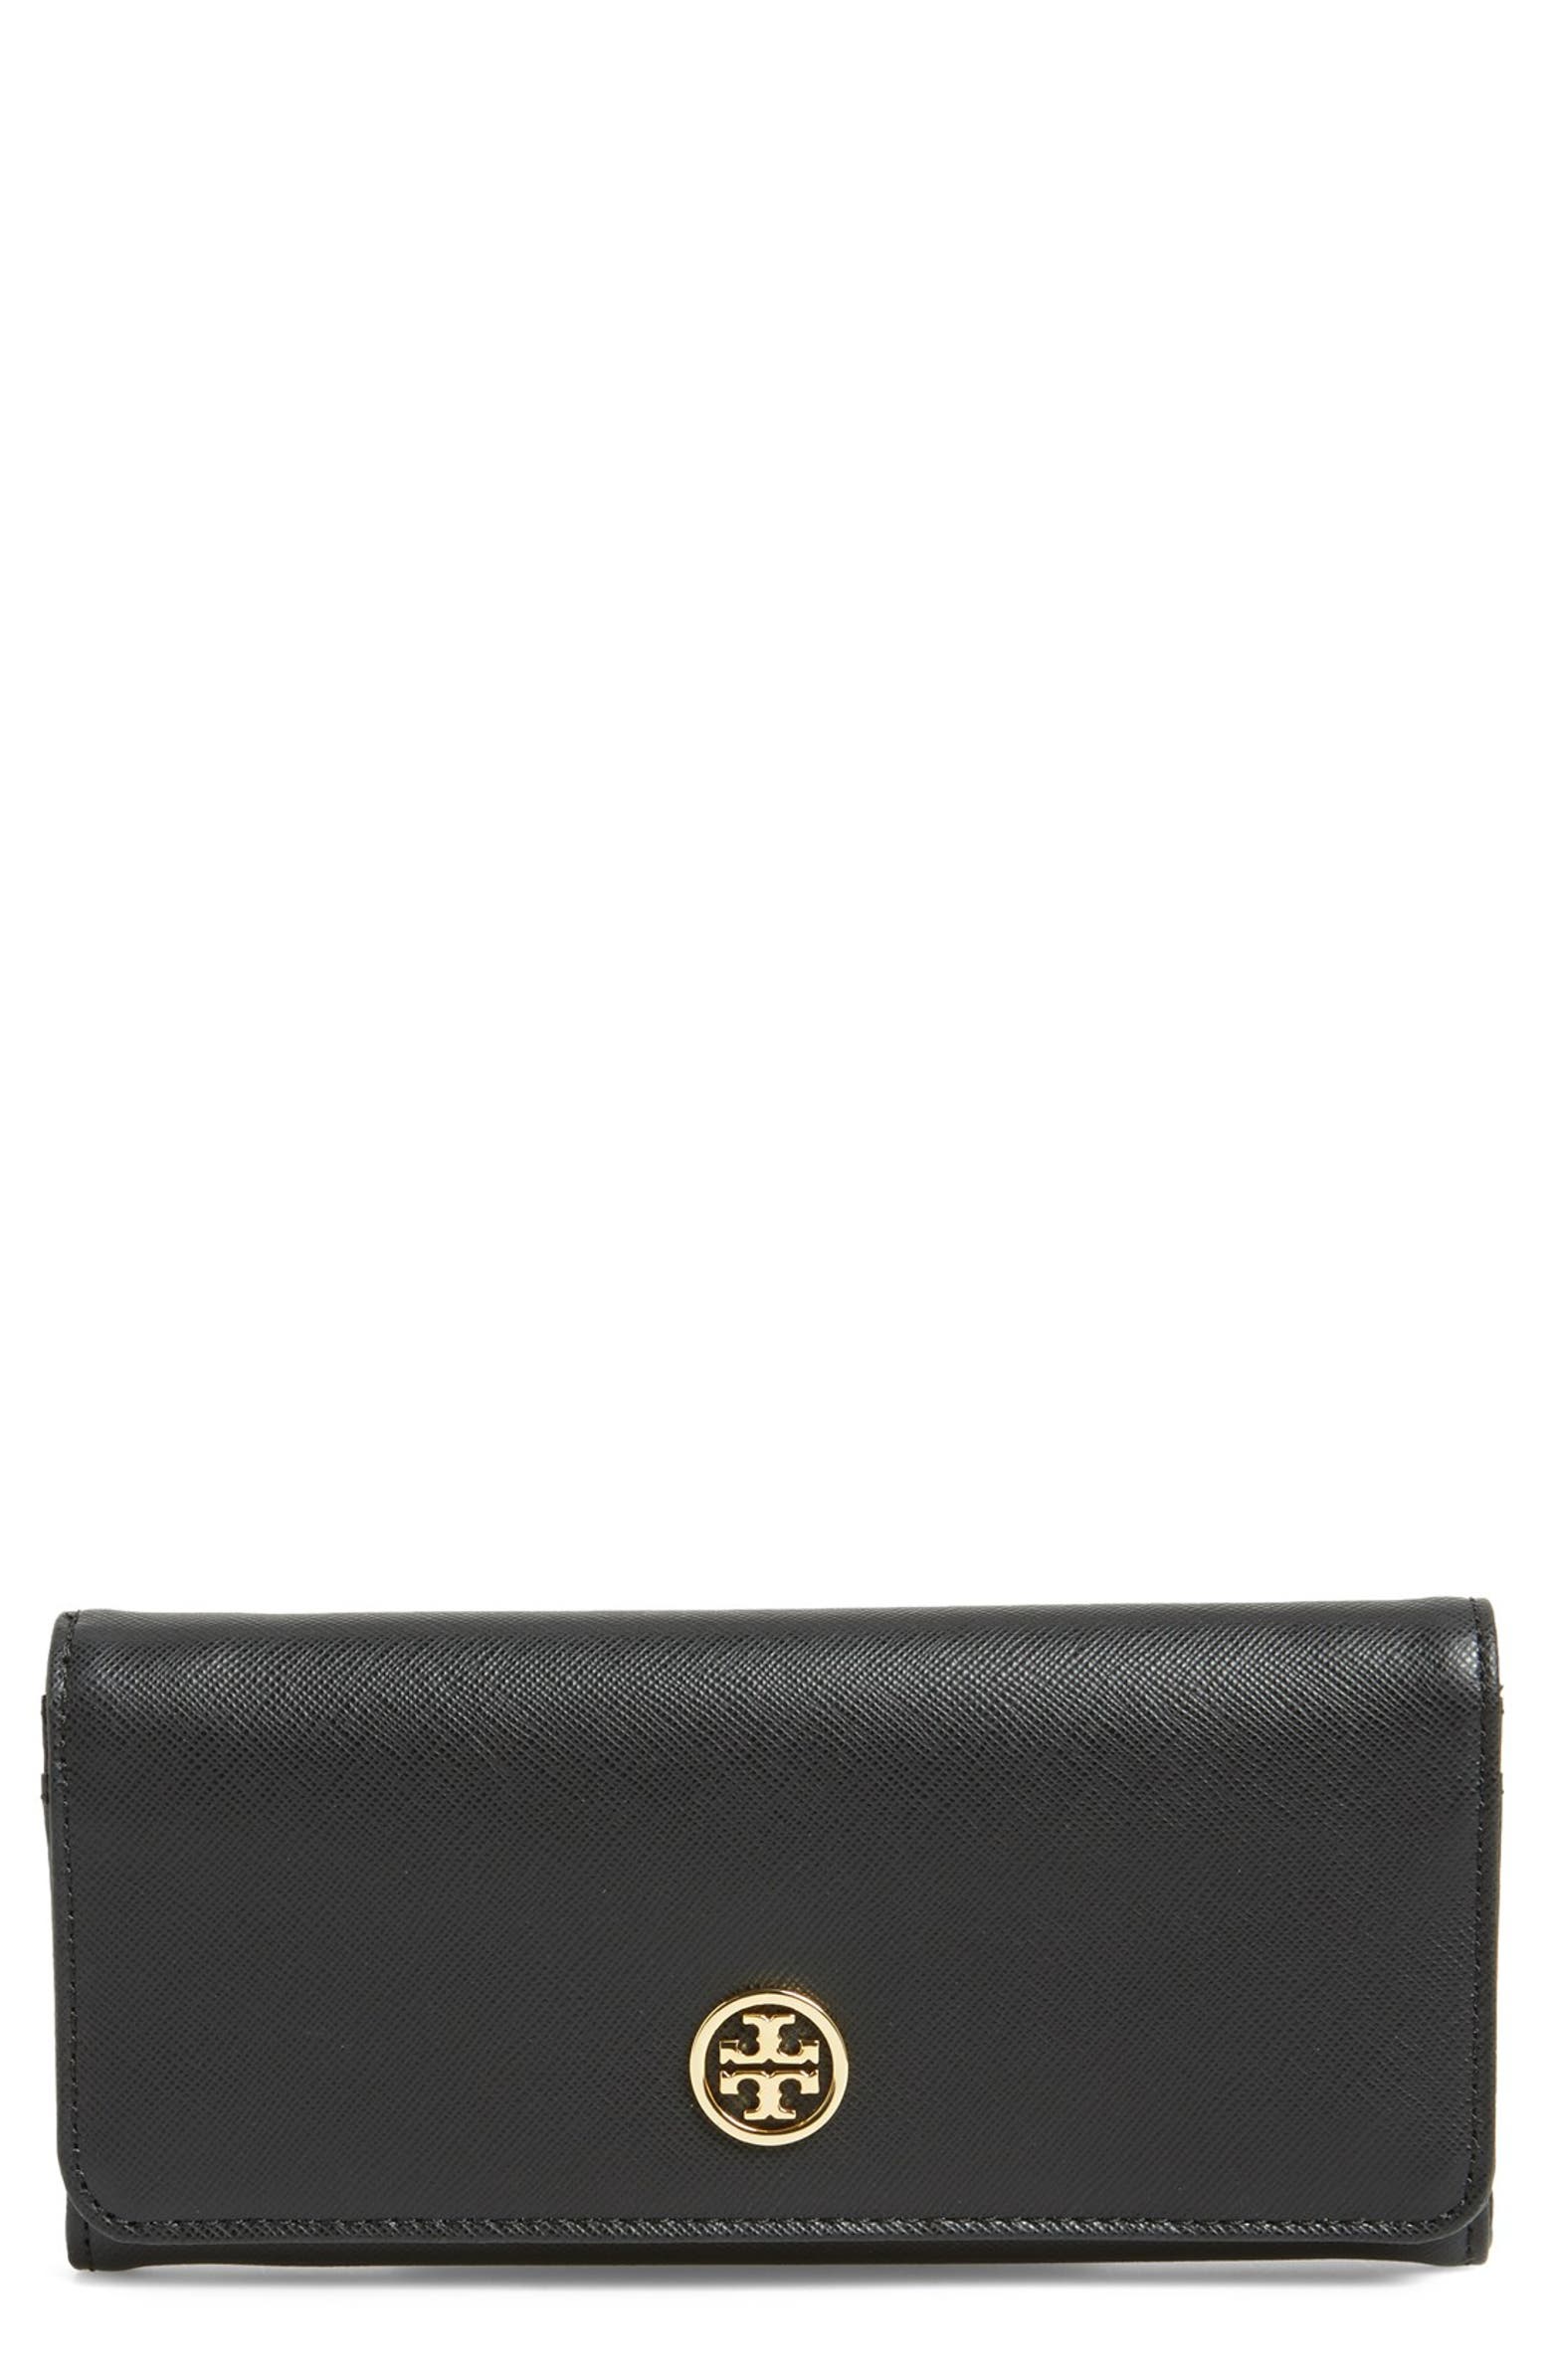 Tory Burch Saffiano Leather Envelope Continental Wallet | Nordstrom